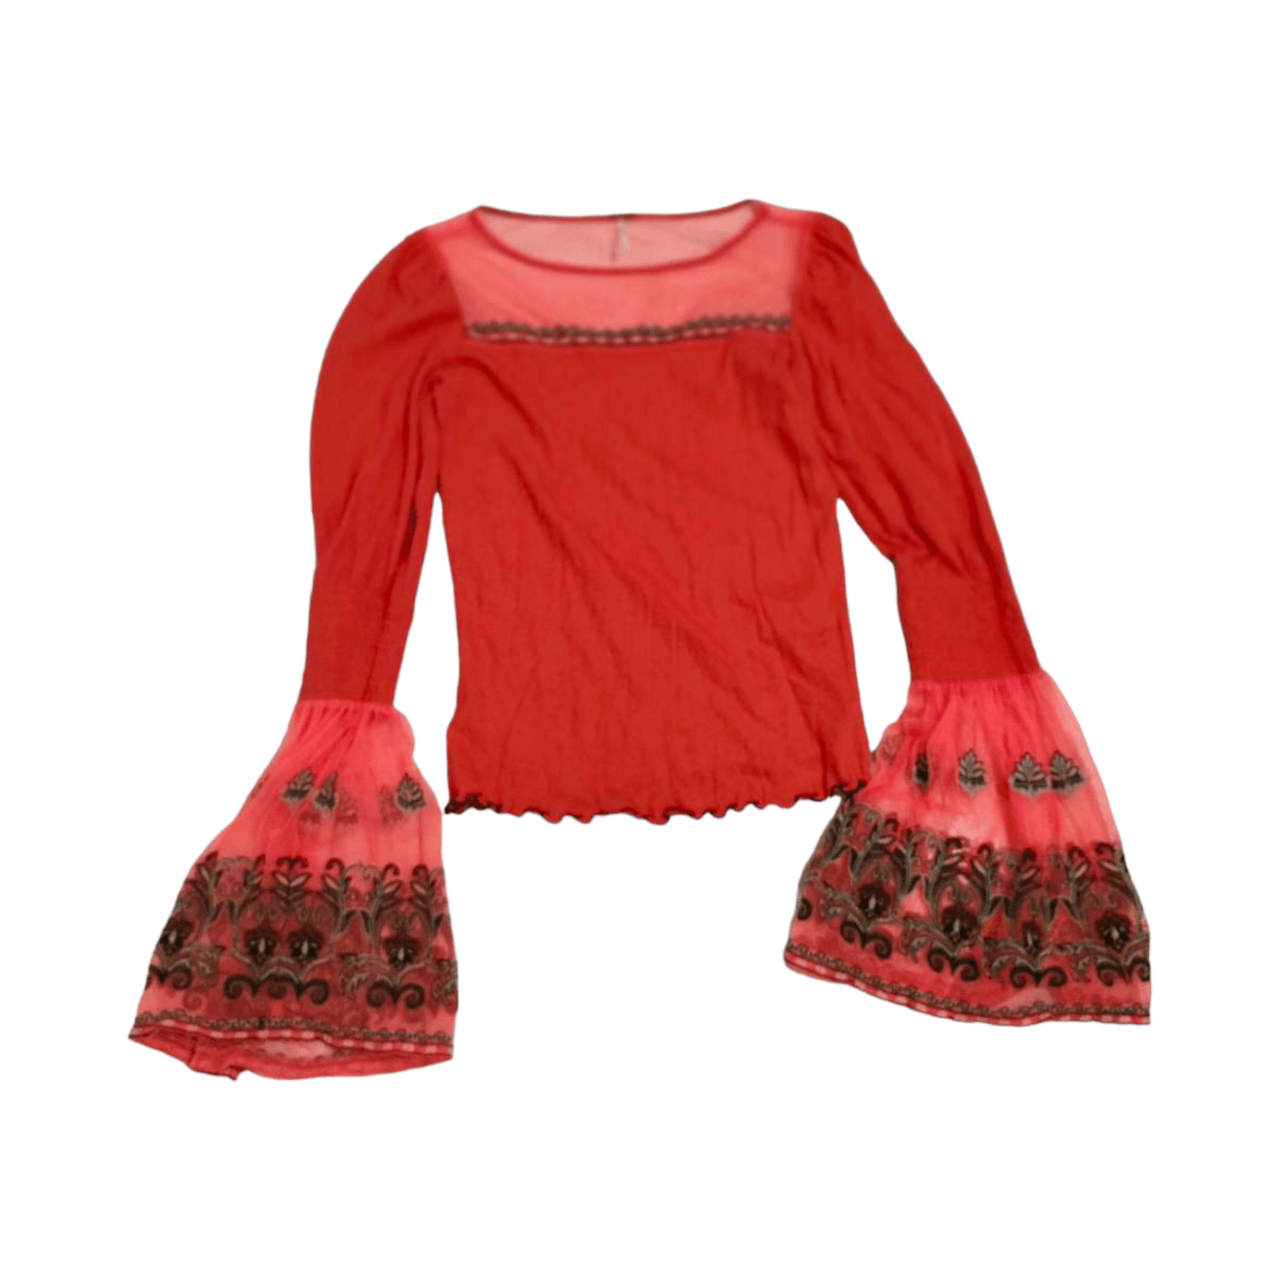 Free People Red Blouse